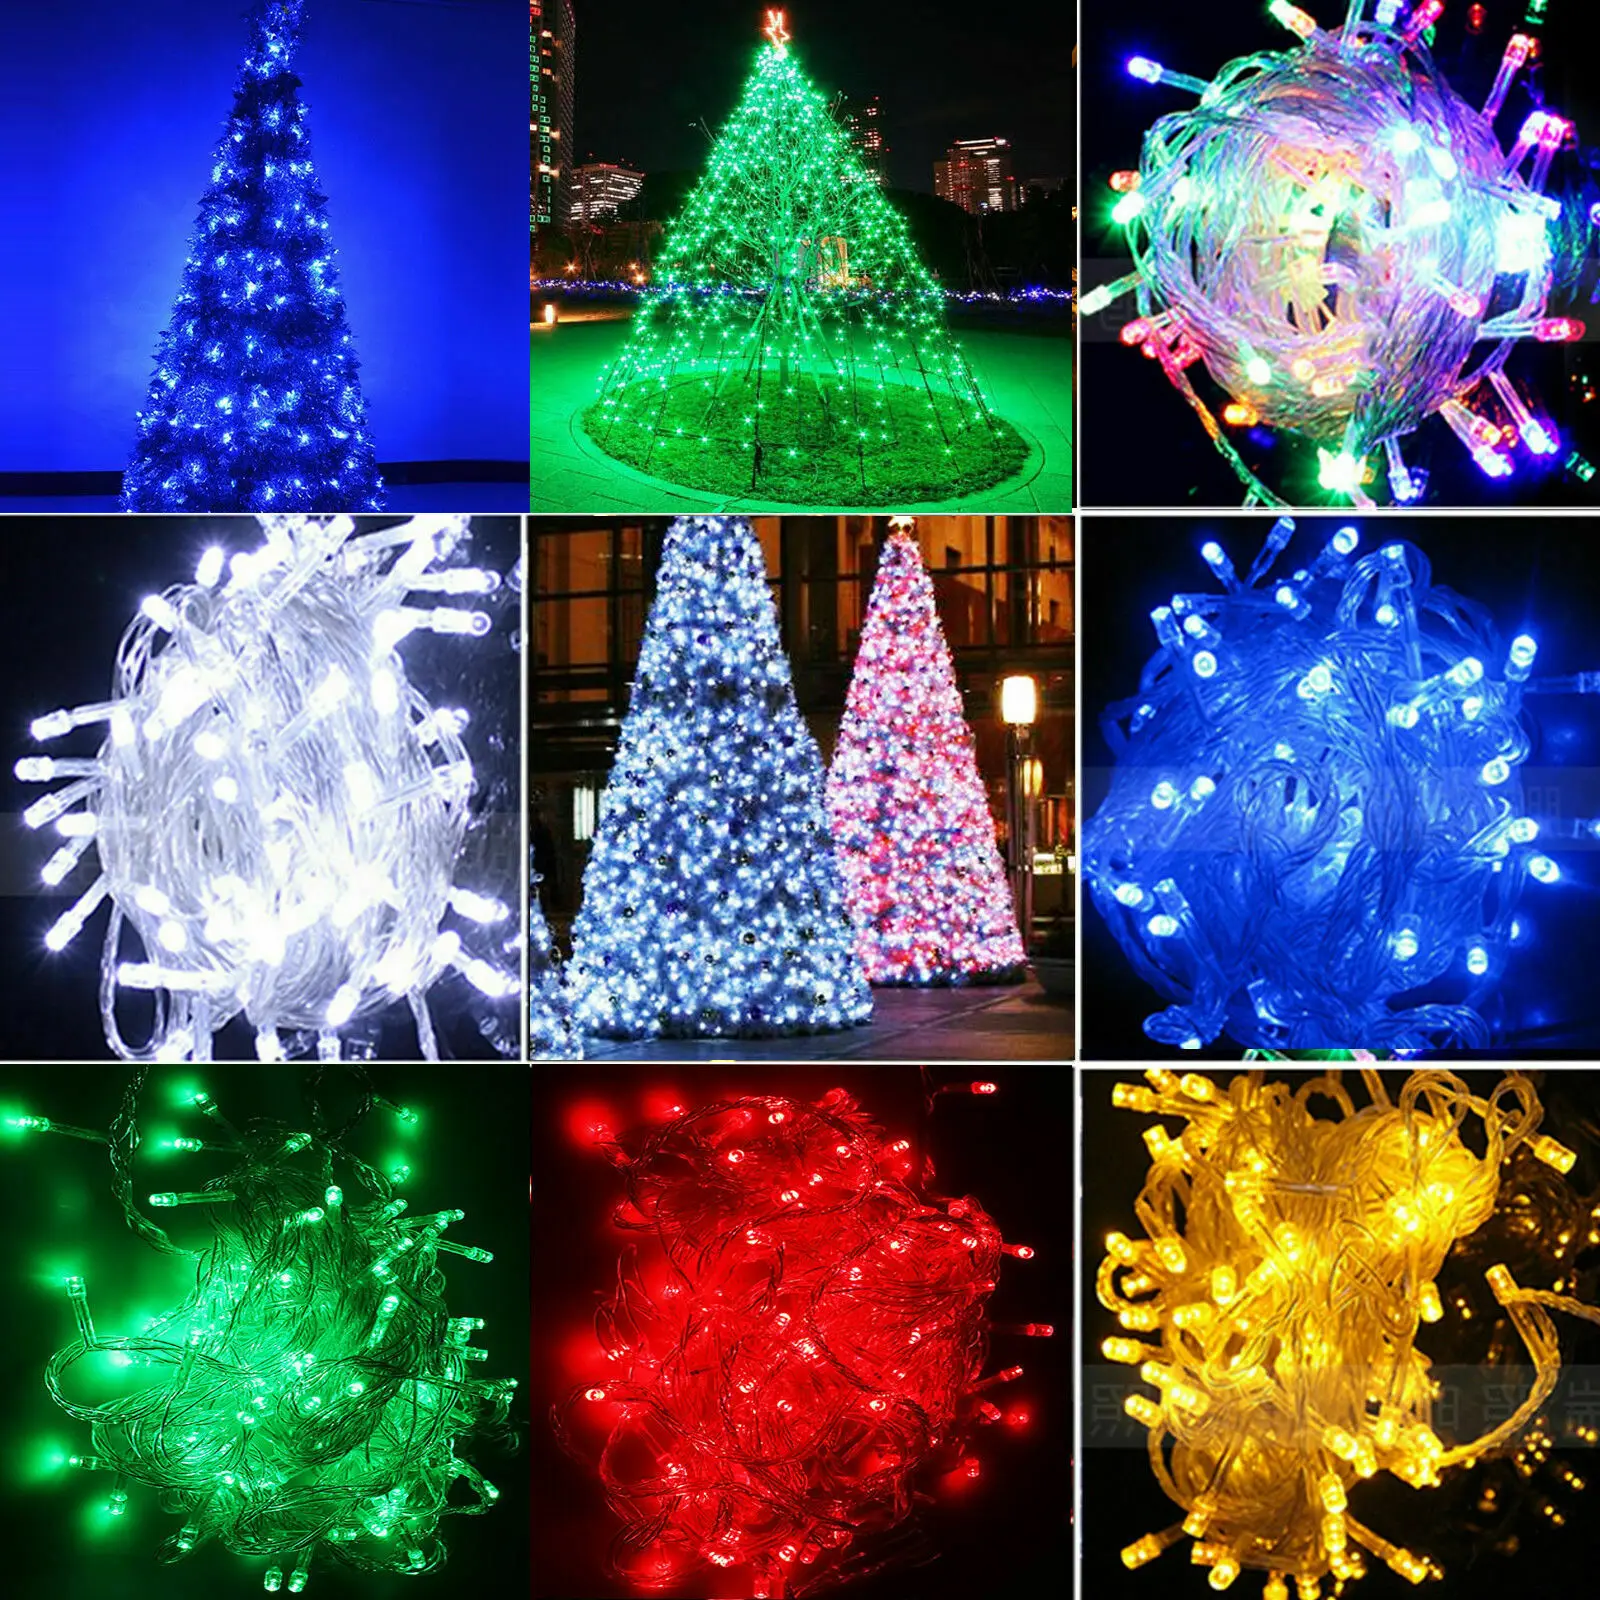 100M LED Christmas Tree String Lights Party Garden Decor Lamp S Waterproof 10M 